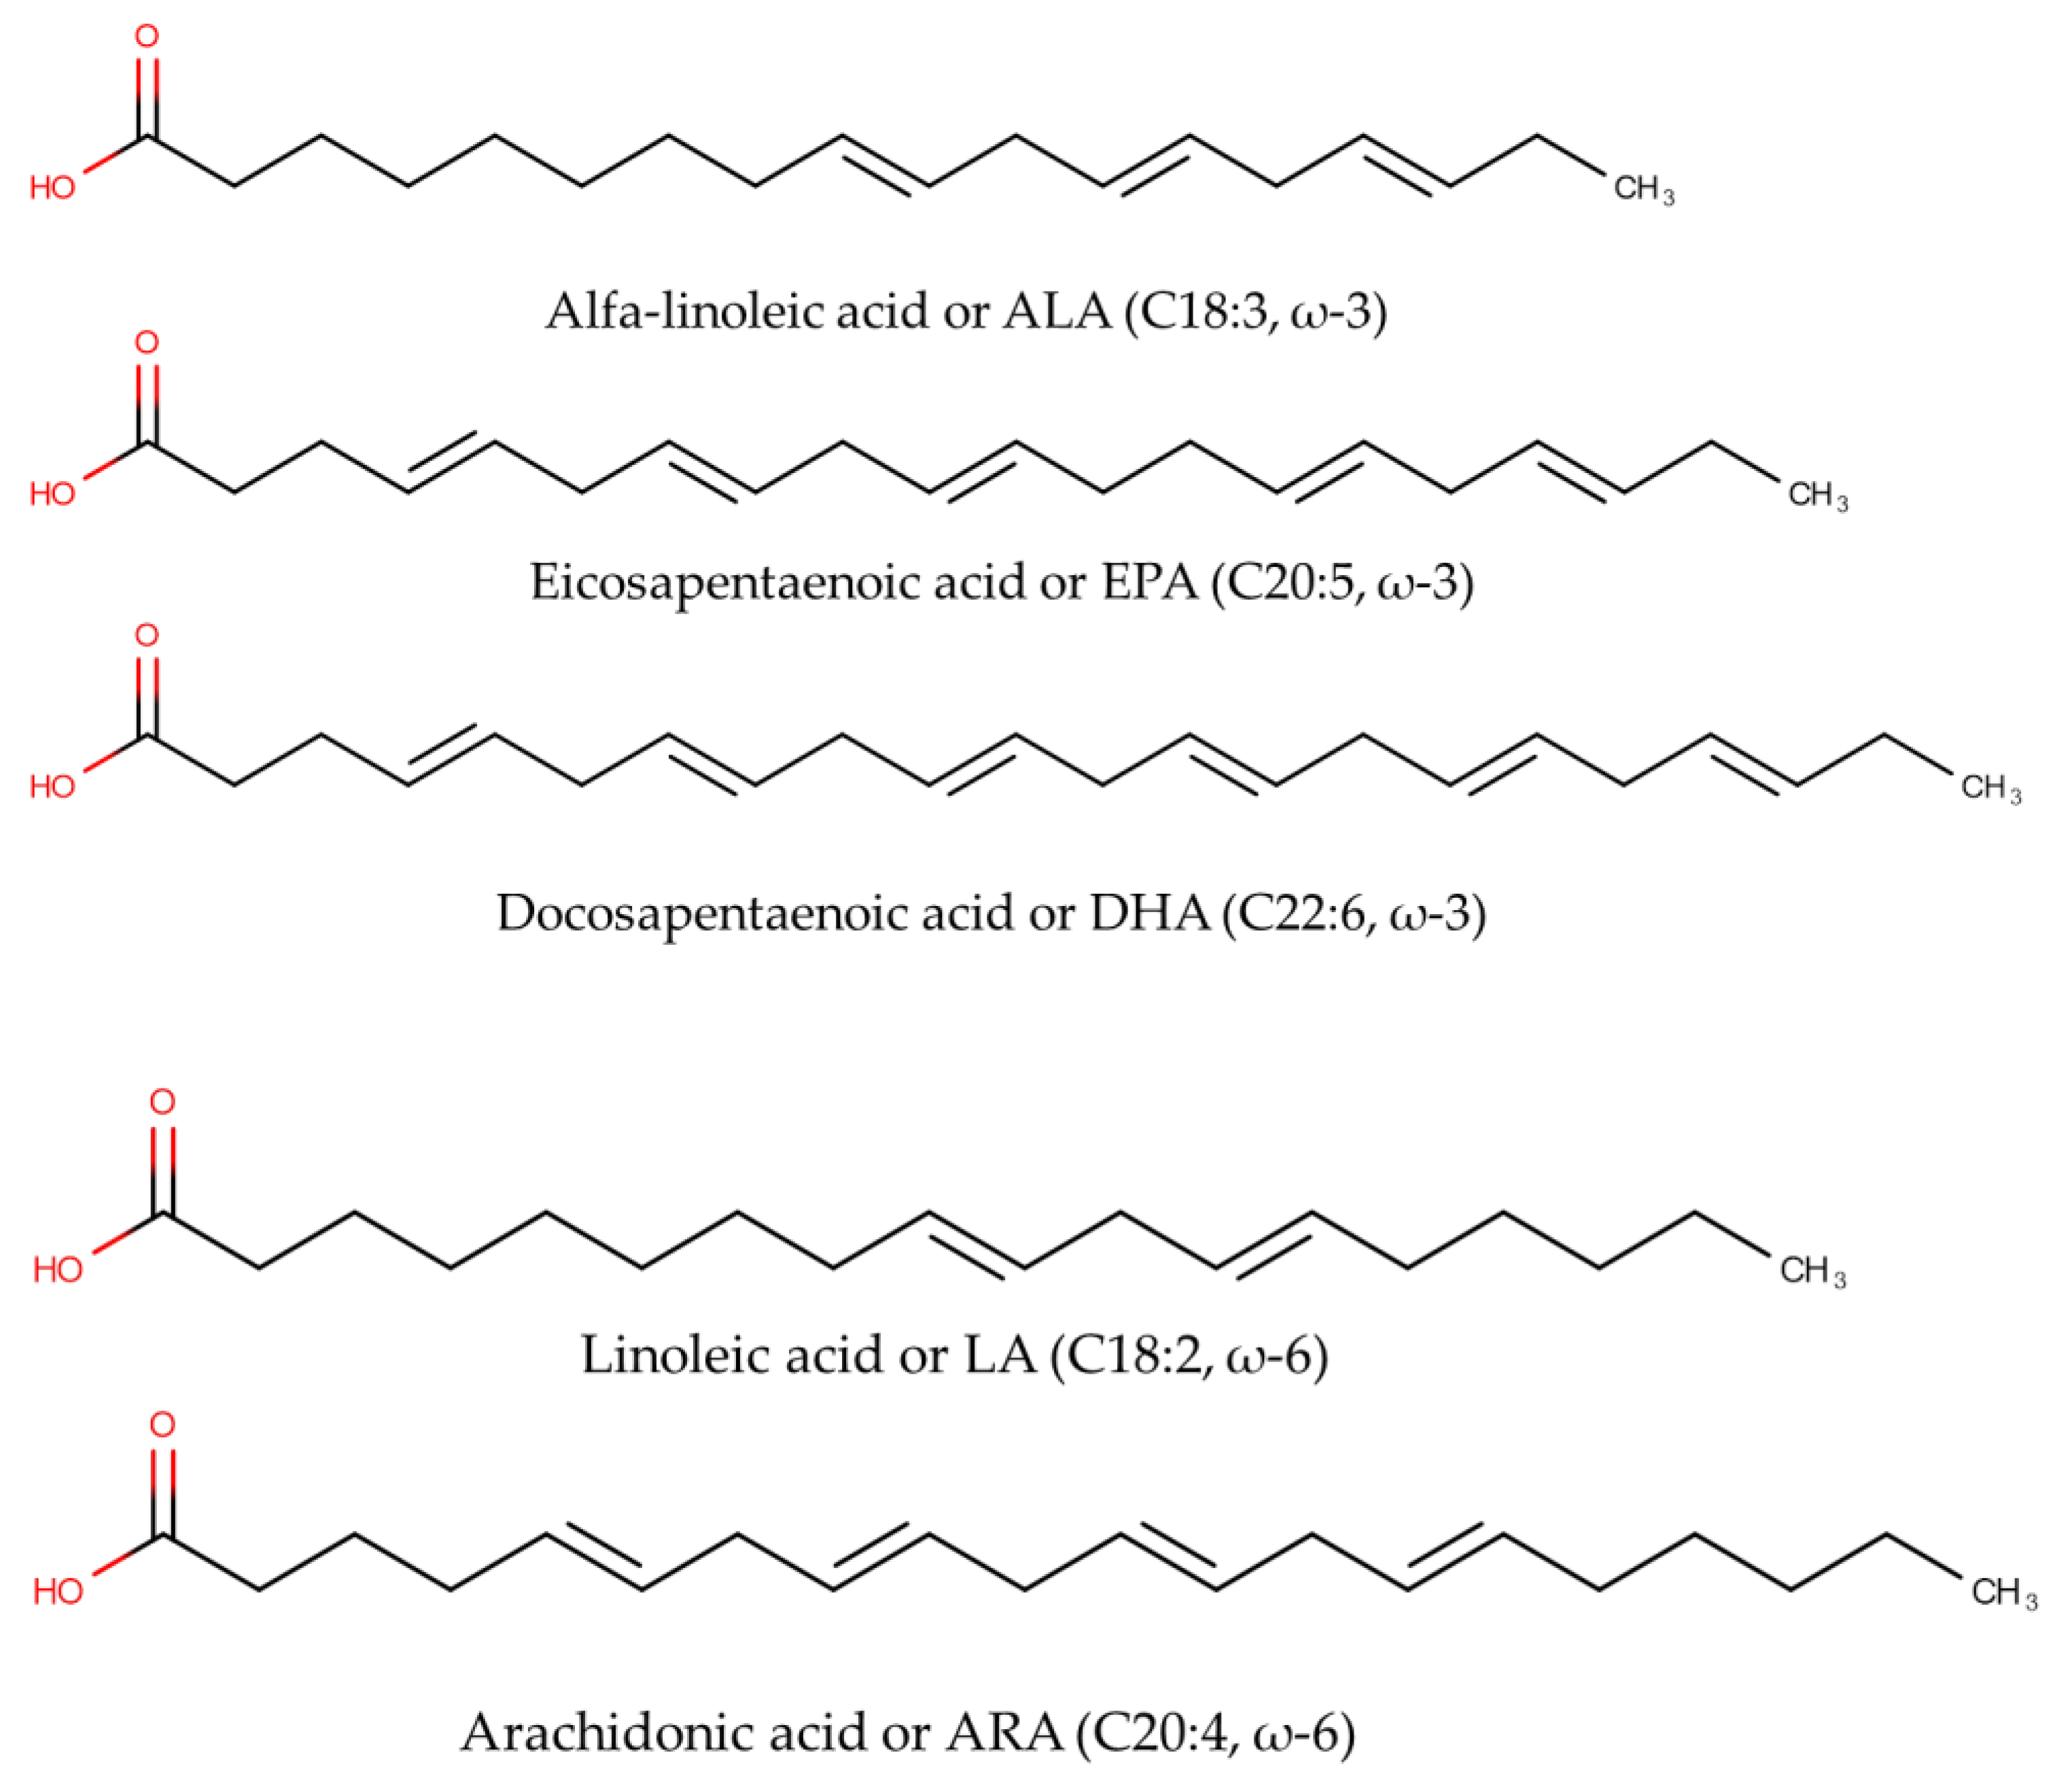 Molecules | Free Full-Text | Application of Chromatographic and  Spectroscopic-Based Methods for Analysis of Omega-3 (&omega;-3 FAs) and  Omega-6 (&omega;-6 FAs) Fatty Acids in Marine Natural Products